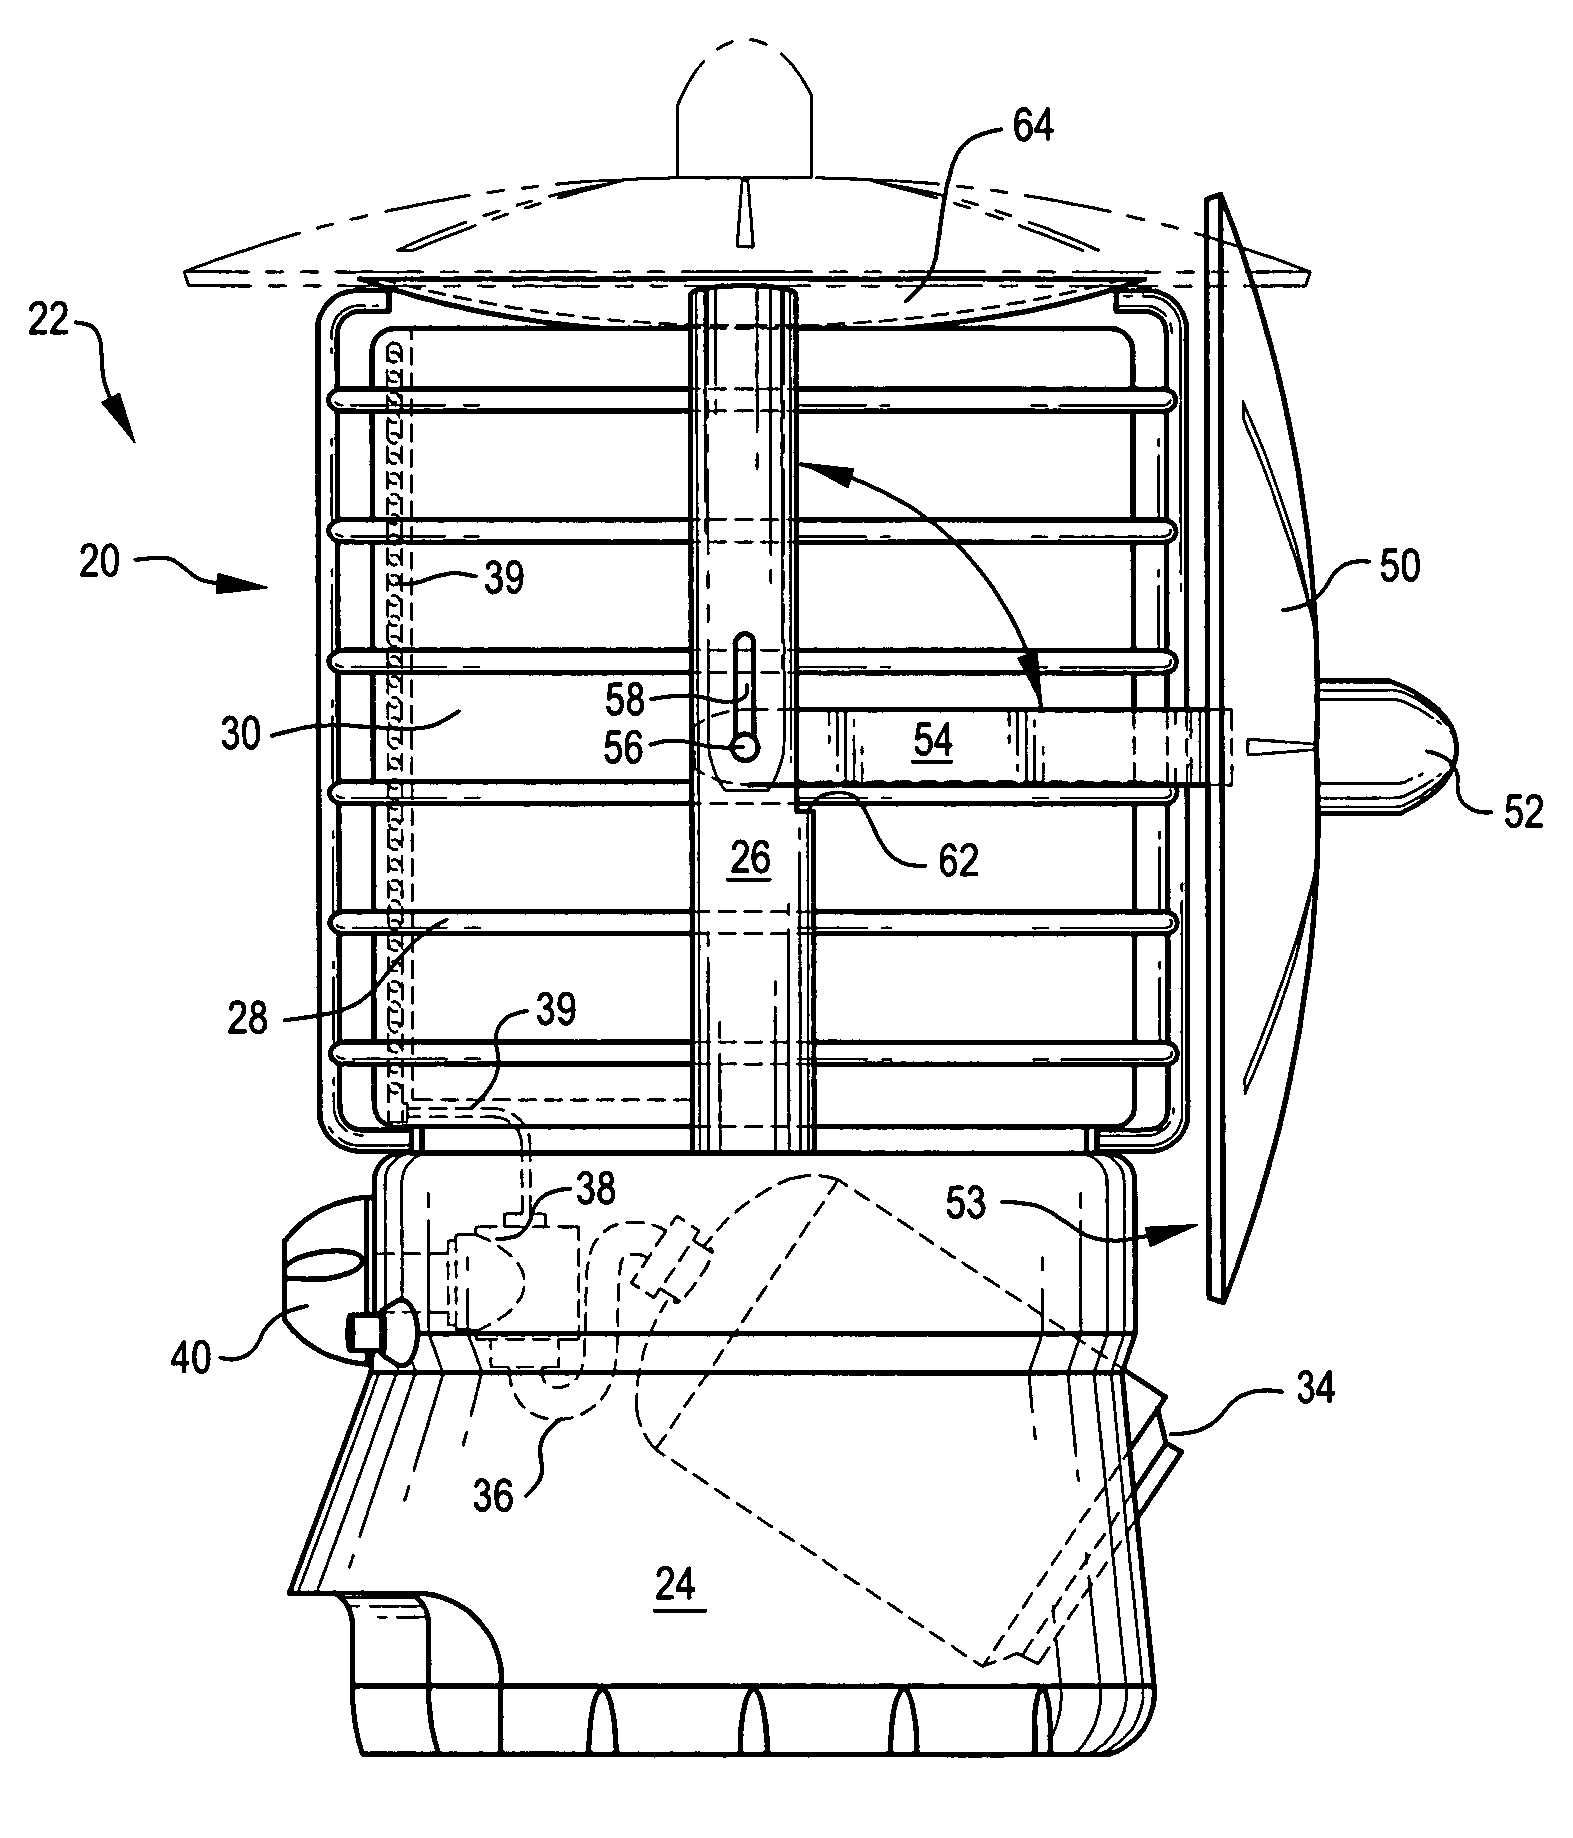 Cylindrical catalytic heater